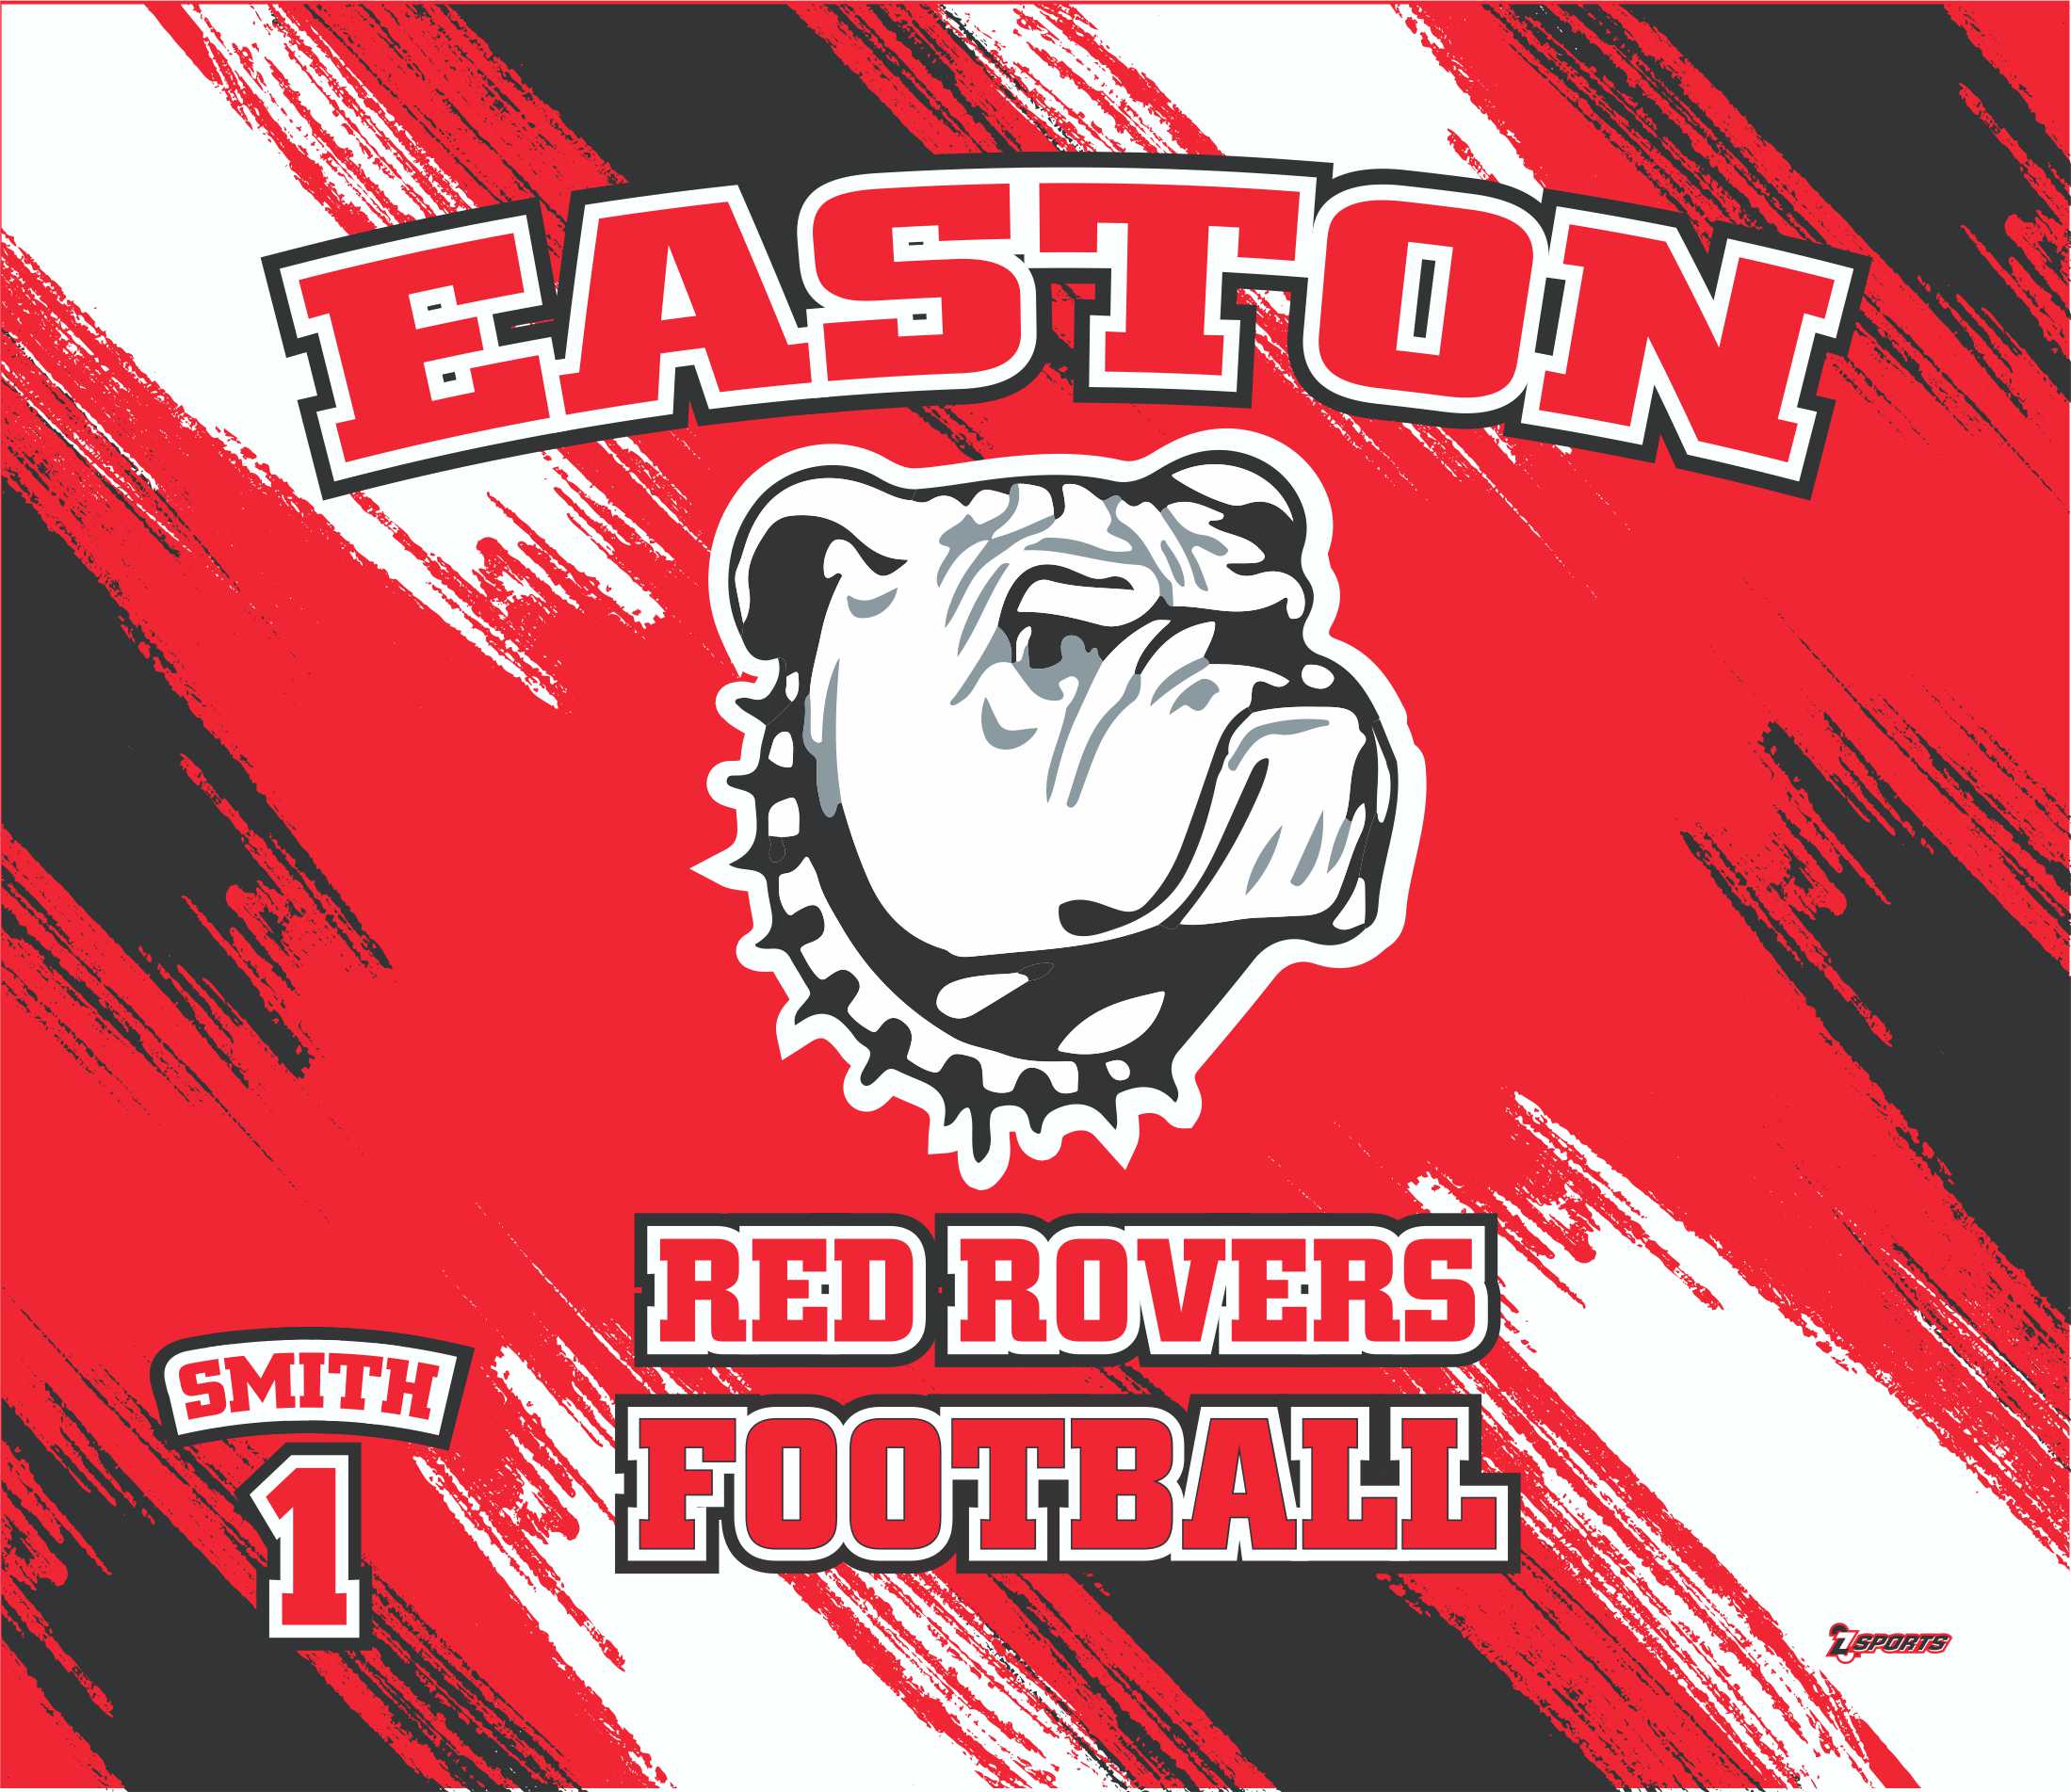 Easton Football Logo - Group Product Page